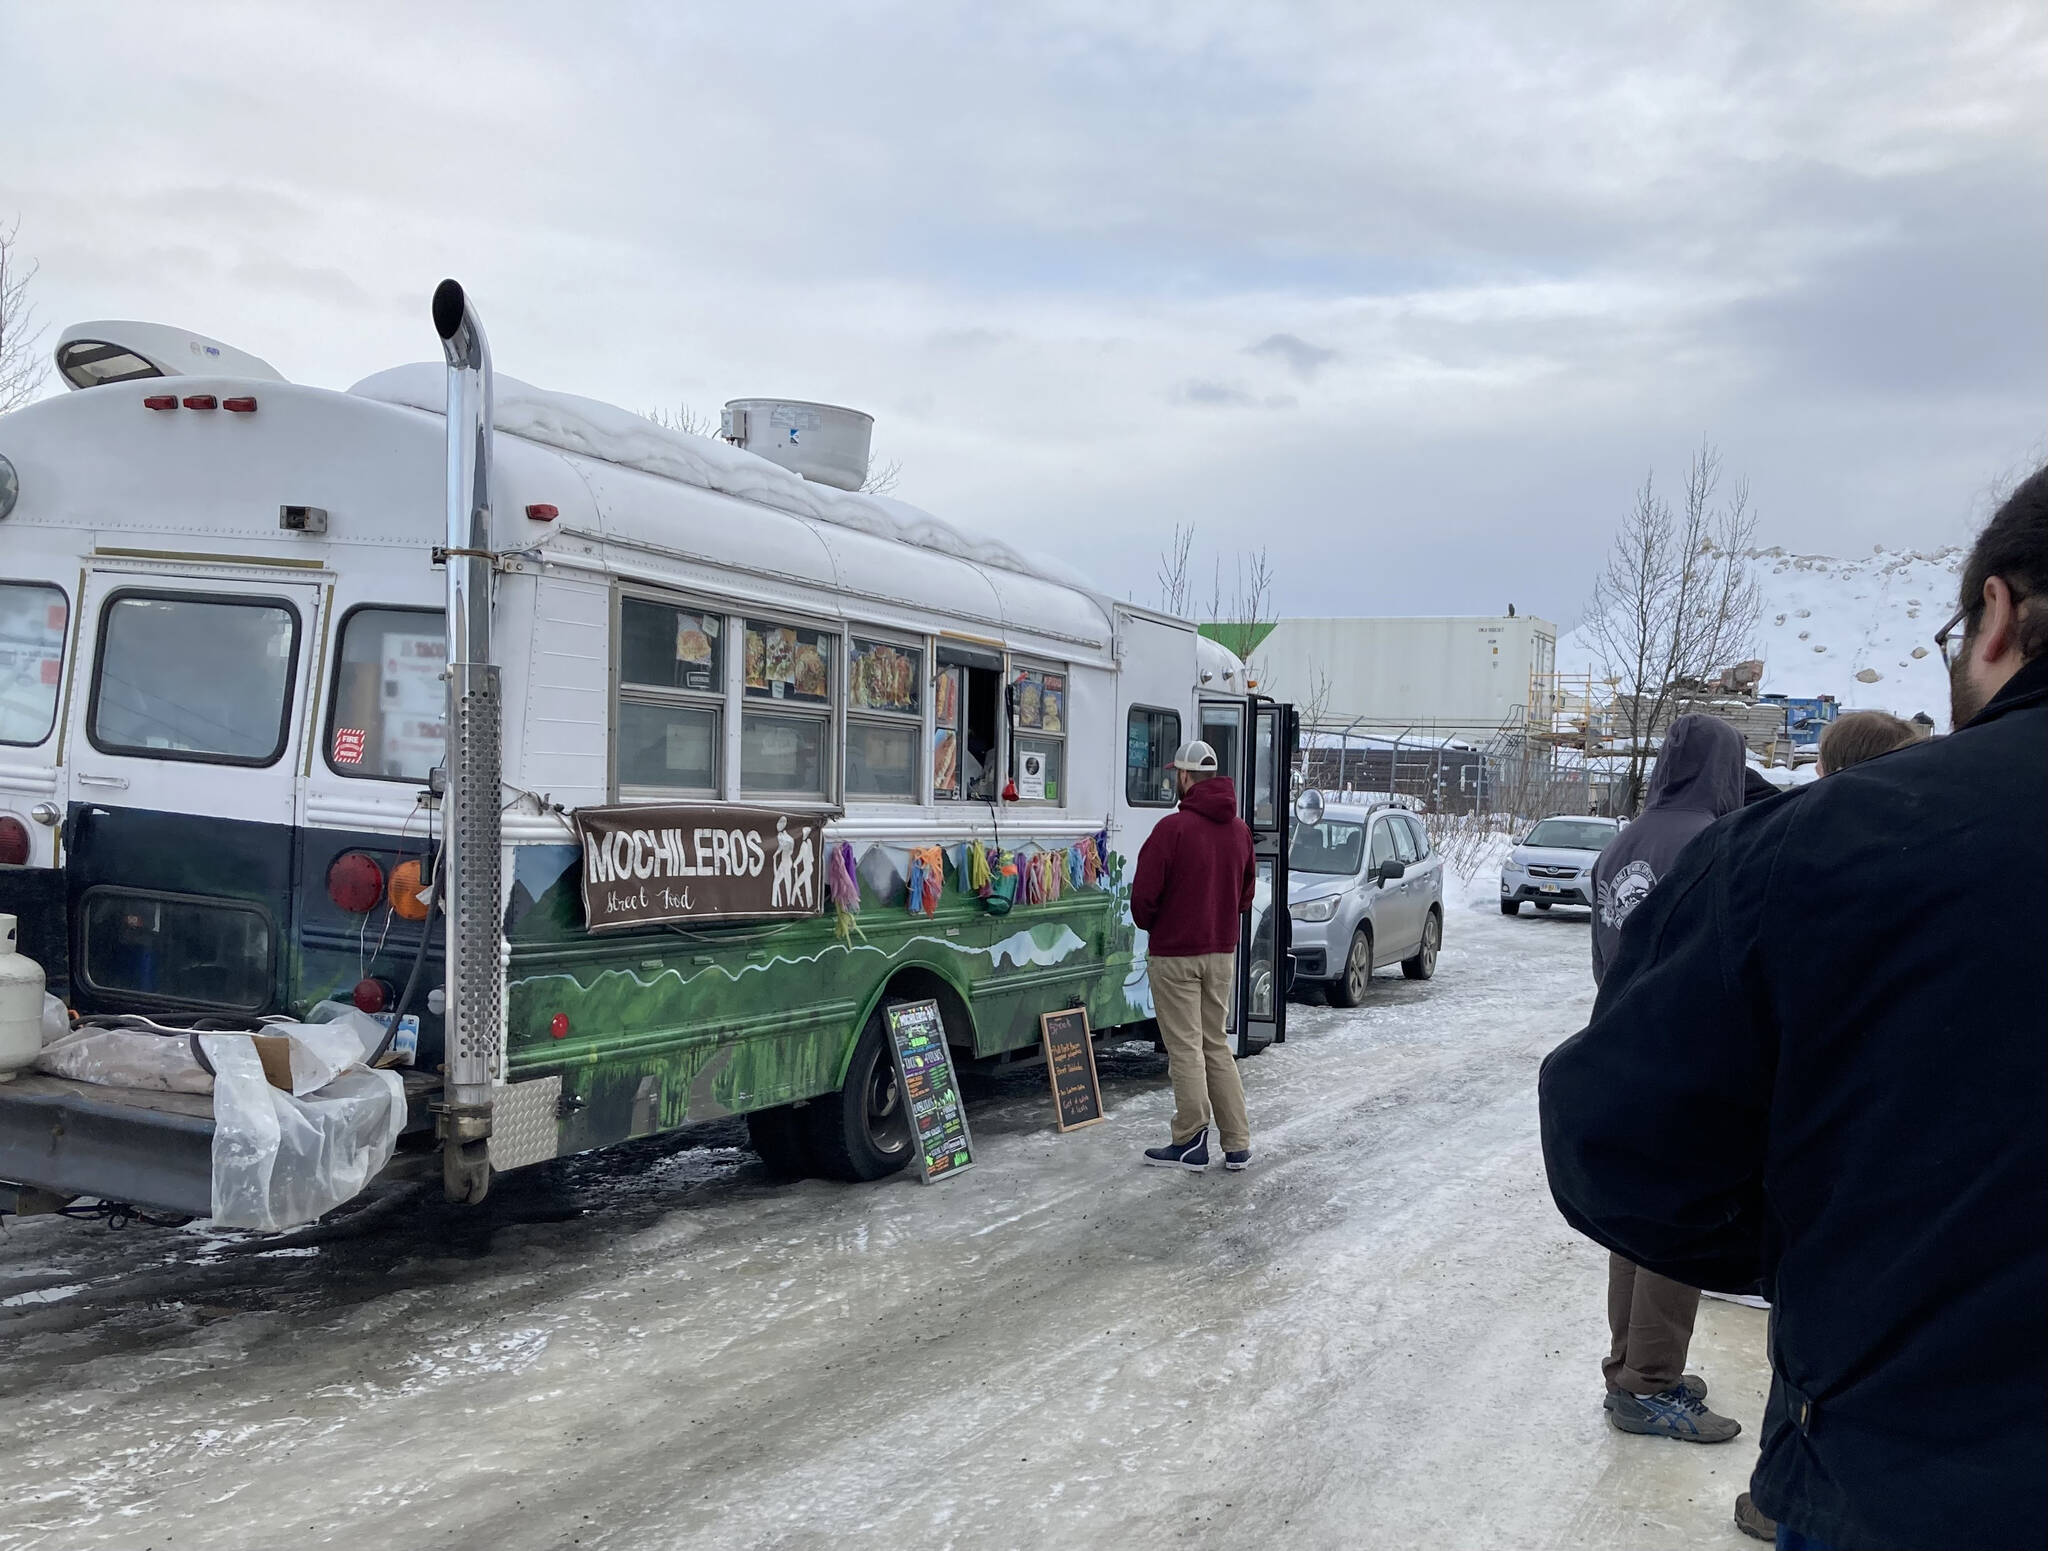 People wait in line for Mochileros Guatemalan street food in Anchorage, Alaska, on March 18, 2022. (Camille Botello/Peninsula Clarion)